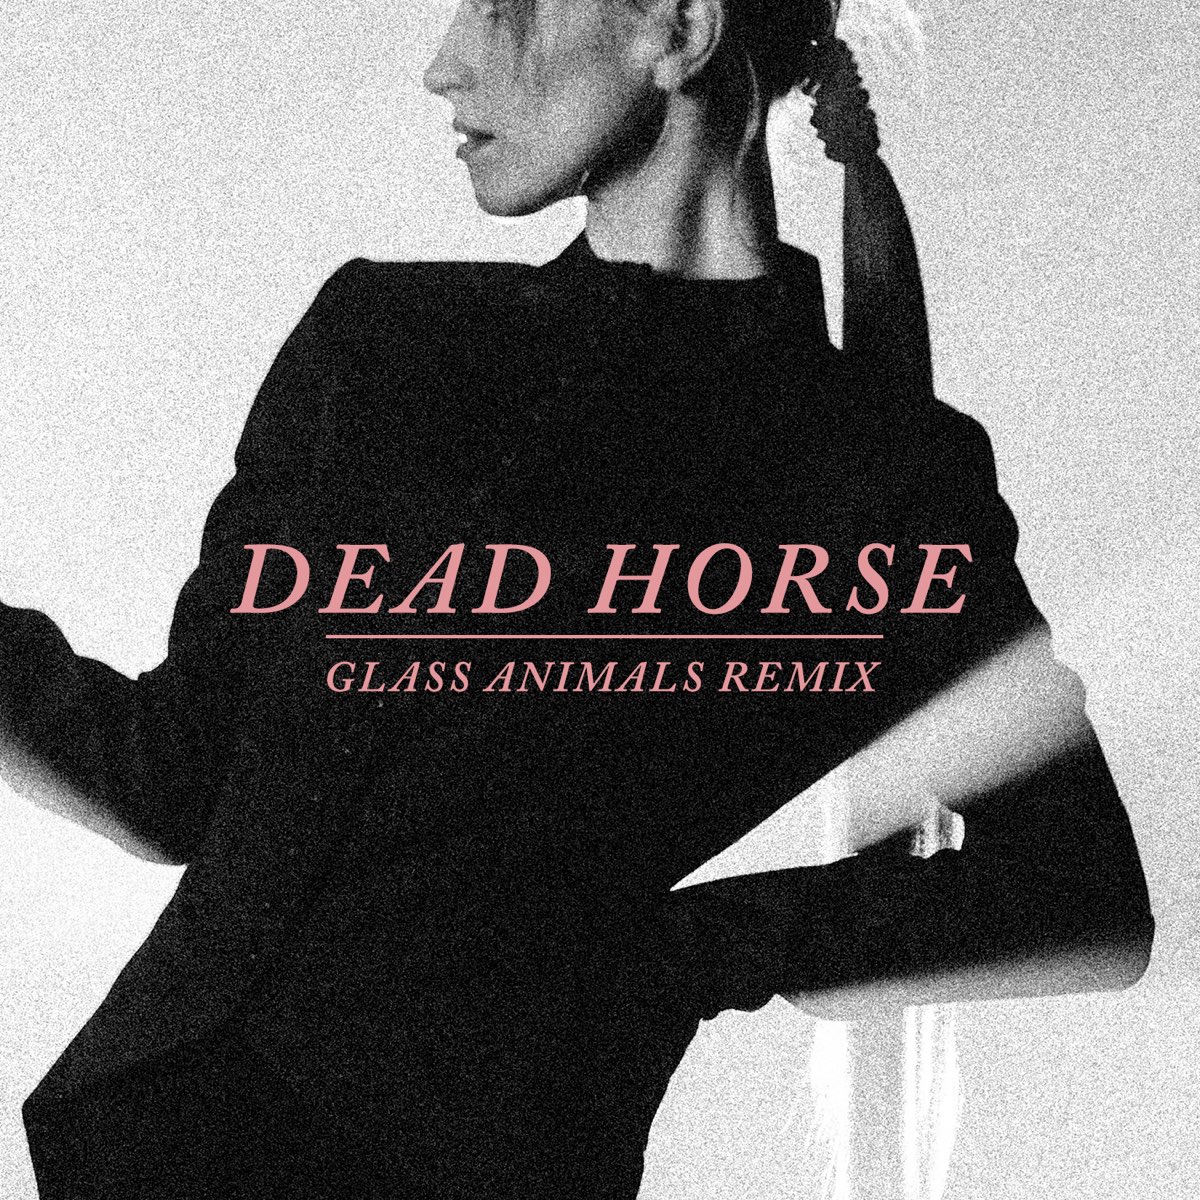 Dead Horse (Glass Animals Remix) - Single by Hayley Williams on Apple Music